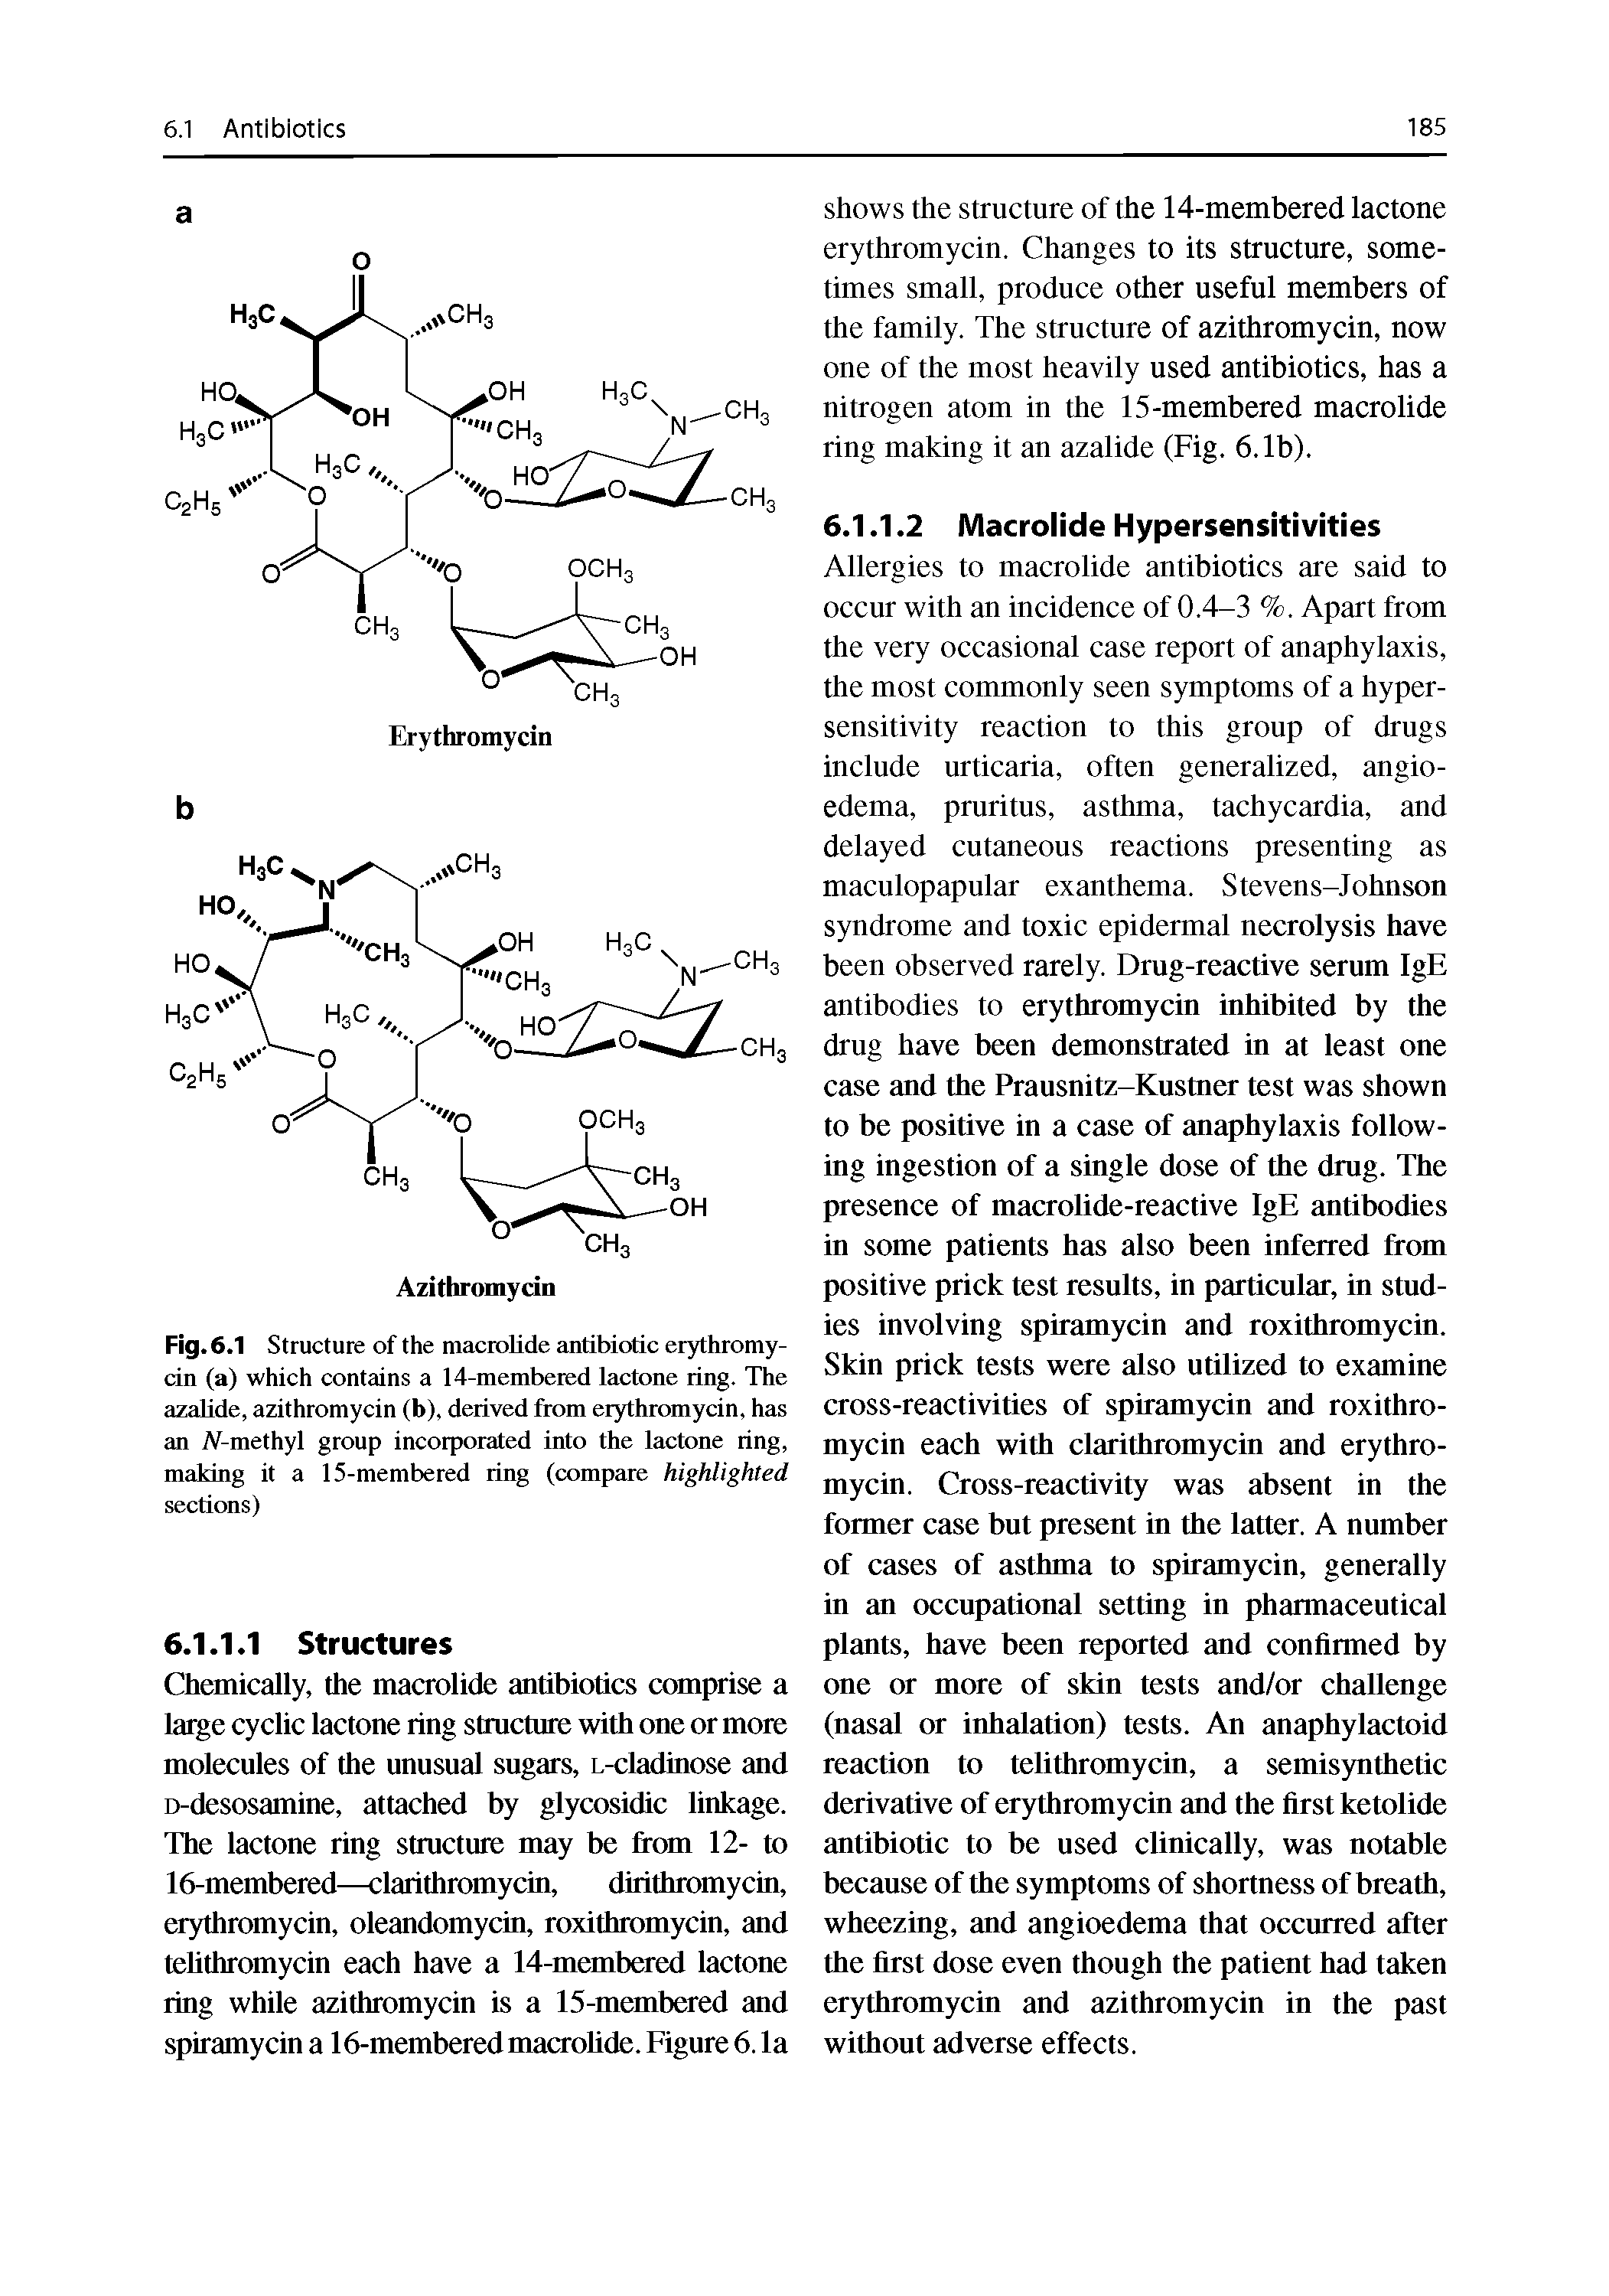 Fig. 6.1 Structure of the macrolide antibiotic erythromycin (a) which contains a 14-membeied lactone ring. The azalide, azithromycin (b), derived from erythromycin, has an iV-methyl group incorporated into the lactone ring, making it a 15-membered ring (compare highlighted sections)...